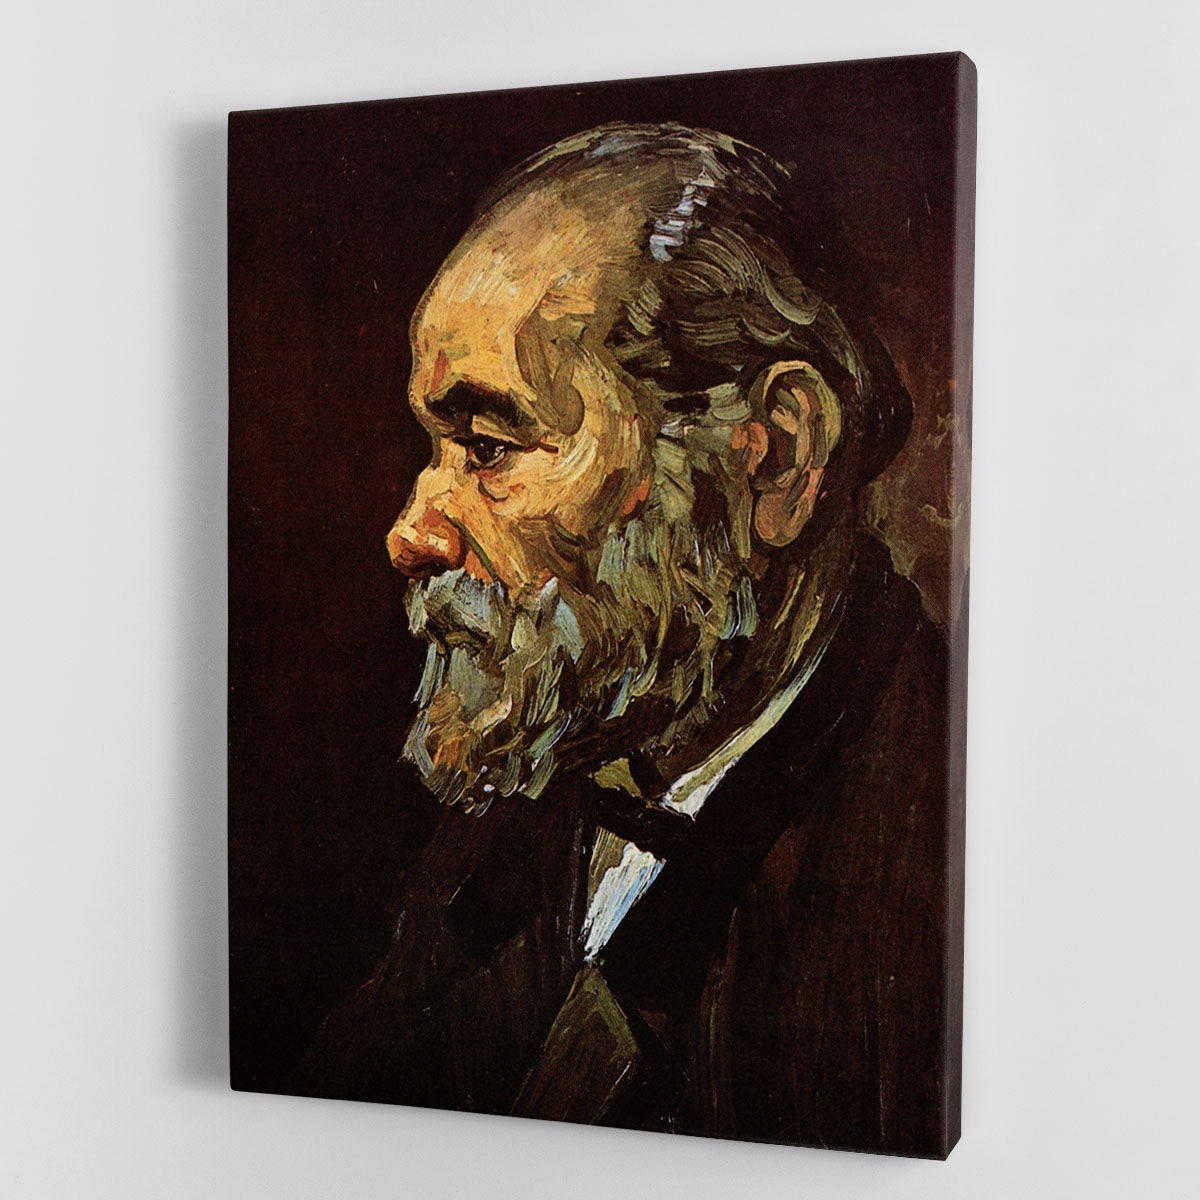 Portrait of an Old Man with Beard by Van Gogh Canvas Print or Poster - Canvas Art Rocks - 1